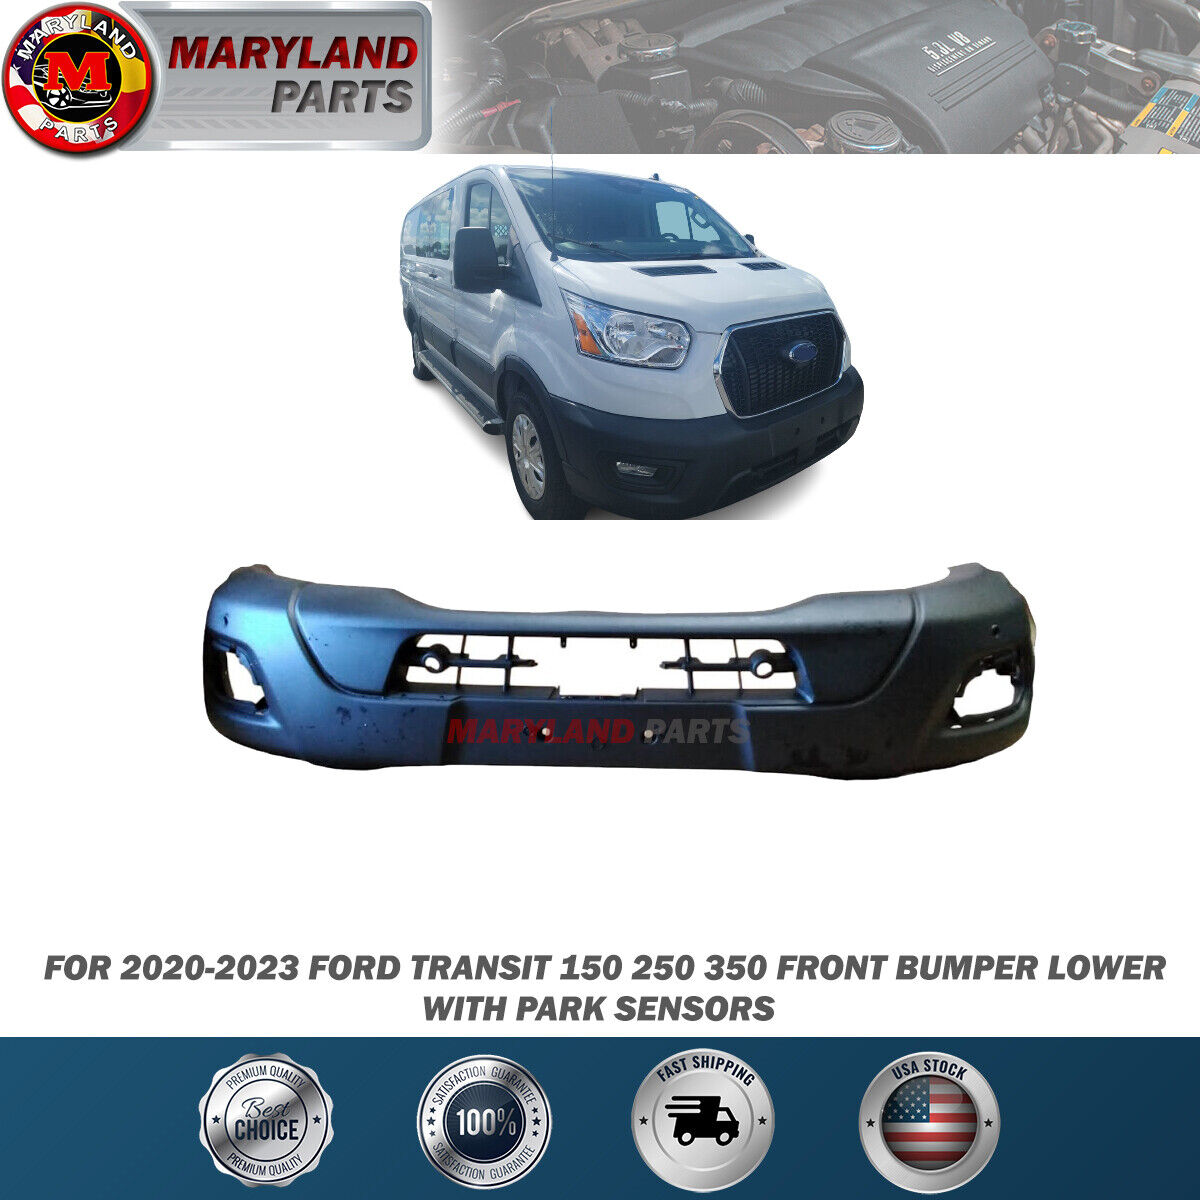 For 2020-2023 Ford Transit 150 250 350 Front Bumper Lower with Park Sensors